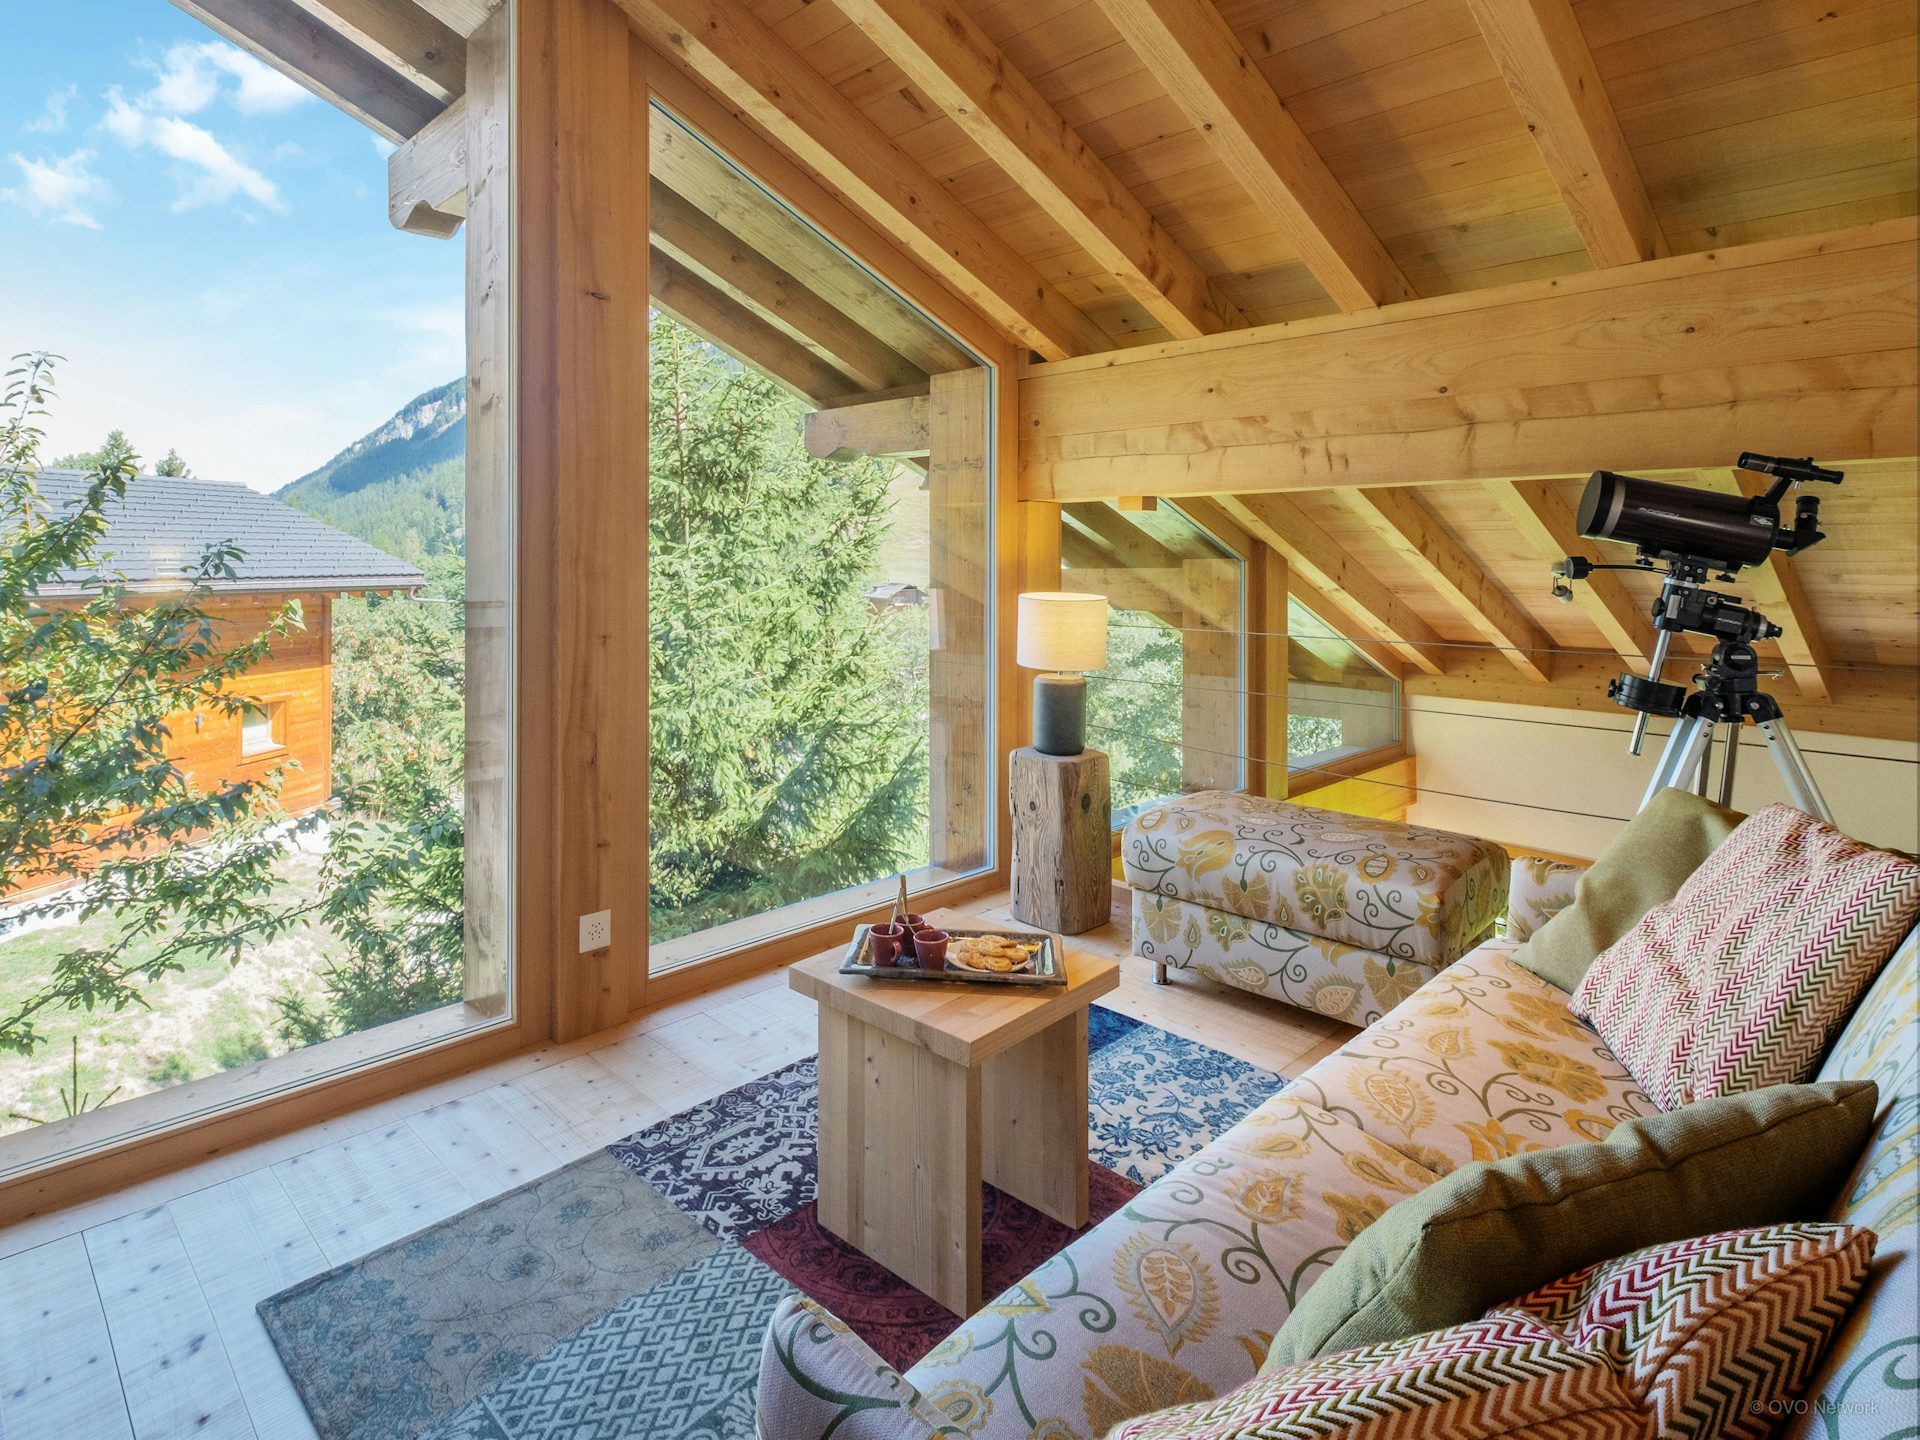 One of the many seating areas at this luxury chalet